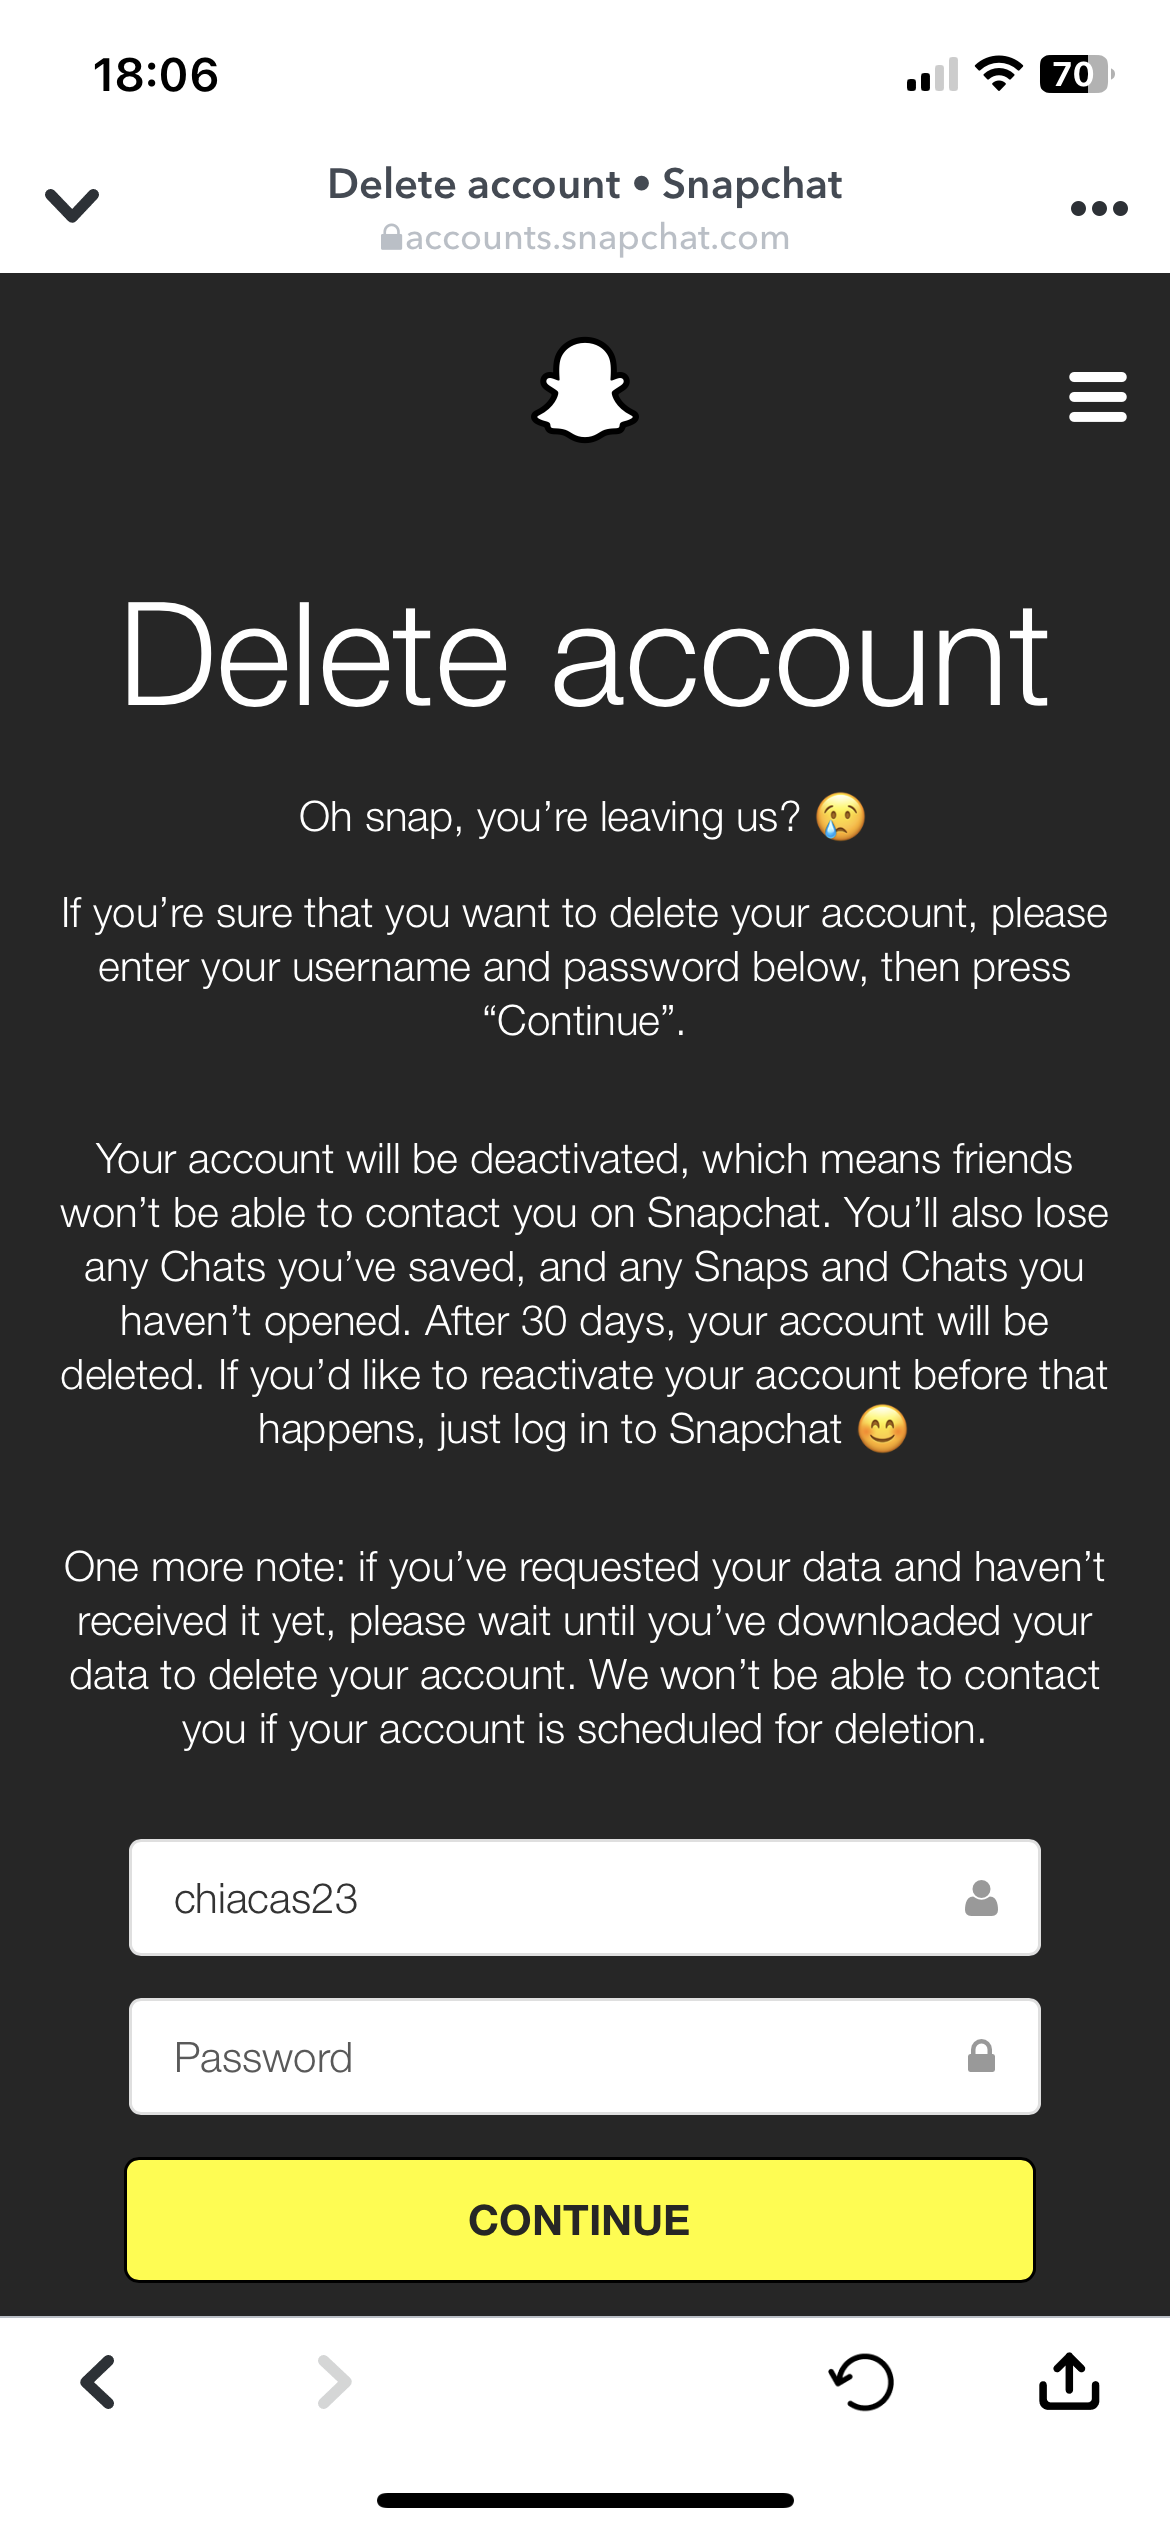 Snapchat's Delete My Account page